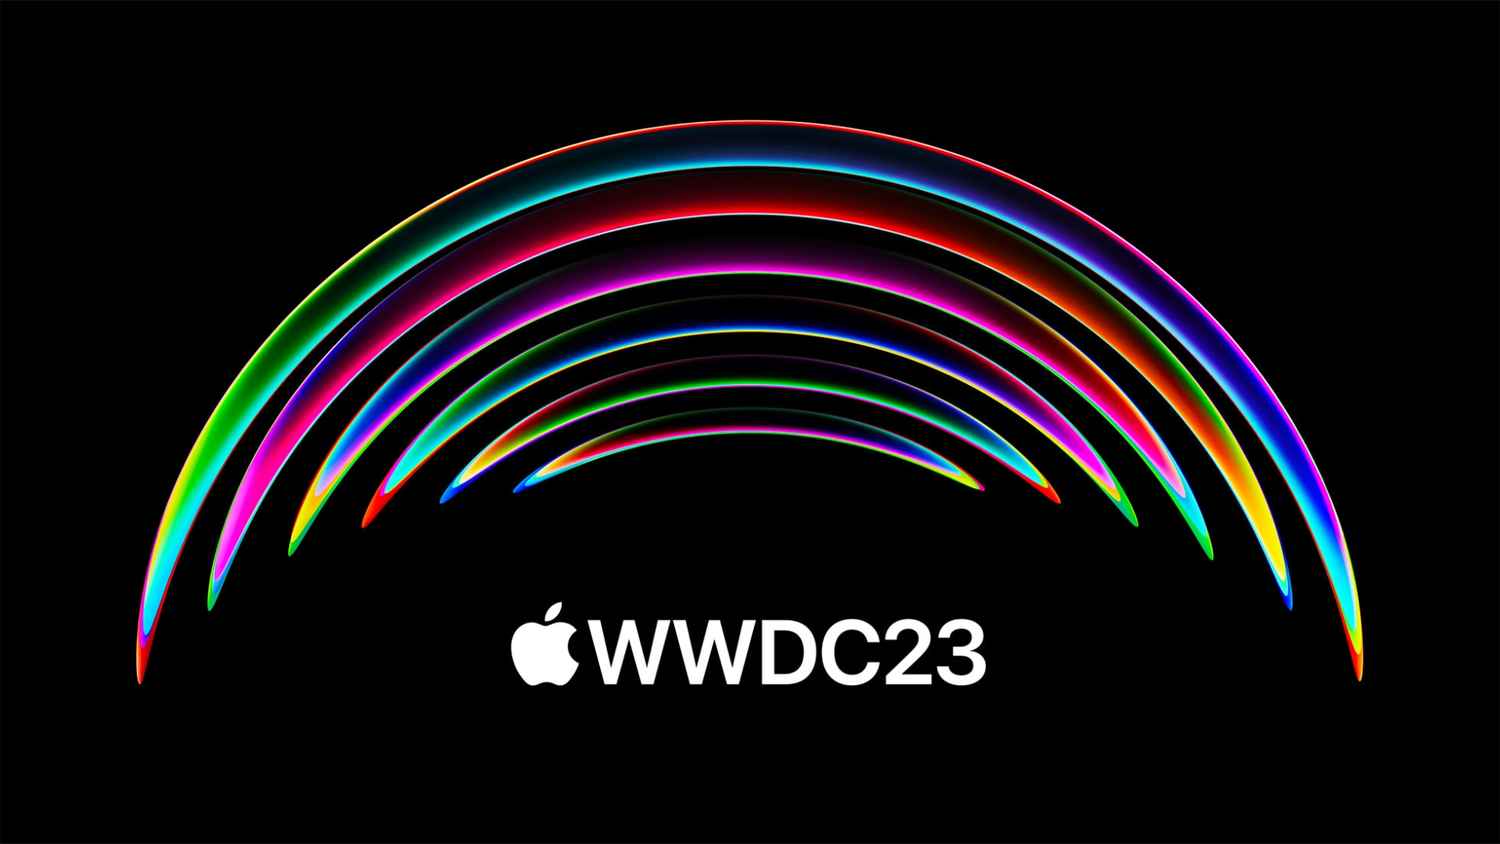 WWDC 23 announced: 4 things to expect from Apple World Wide Developer Conference